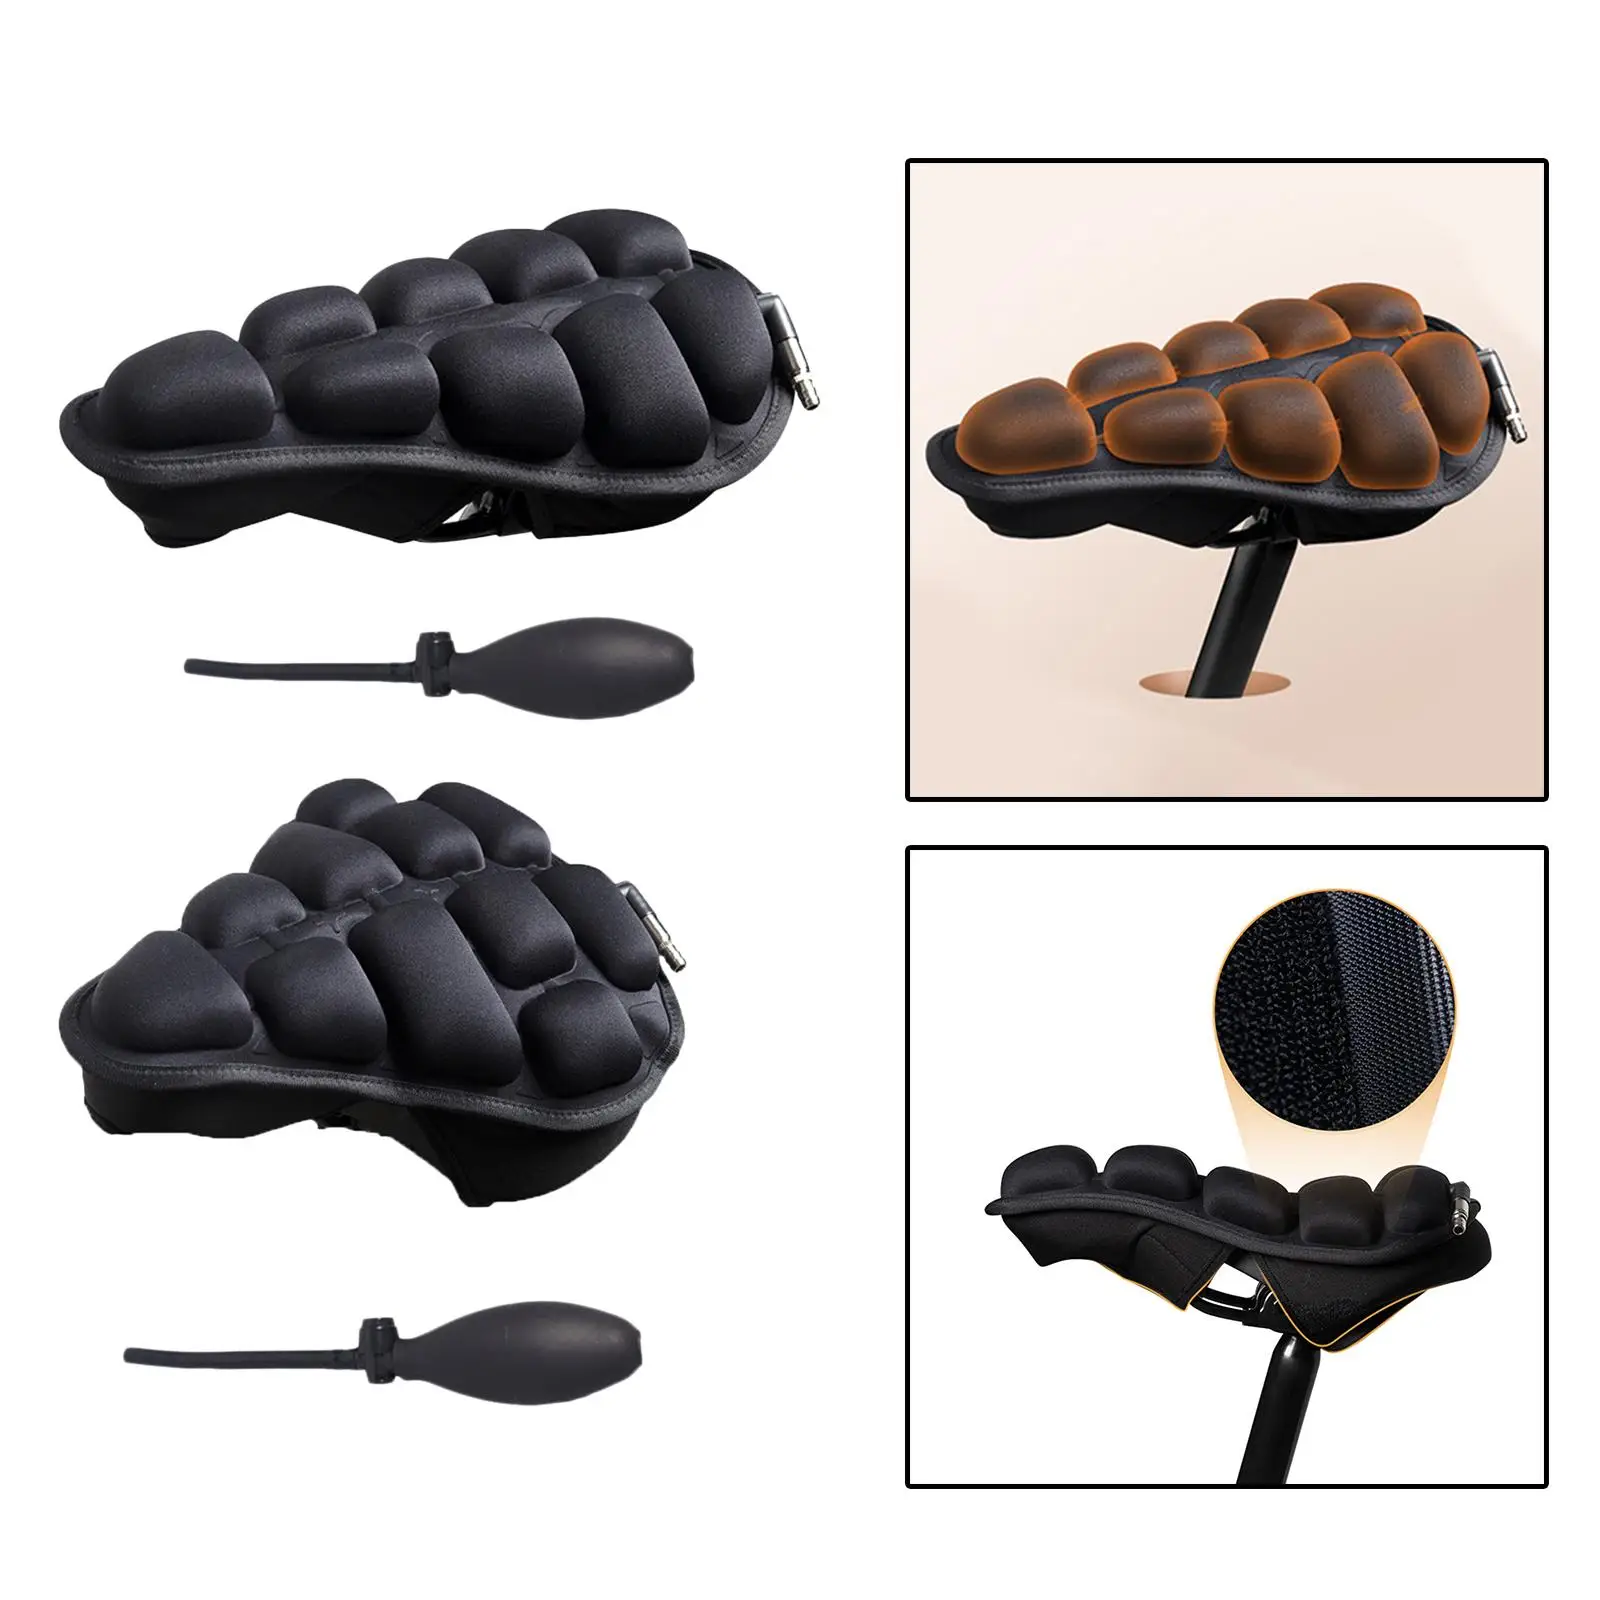 Comfort Bike Seat Cushion Cover Soft Inflatable Bicycle Seat Cover Bike Saddle Cover for Mountain Road Bike Traveling